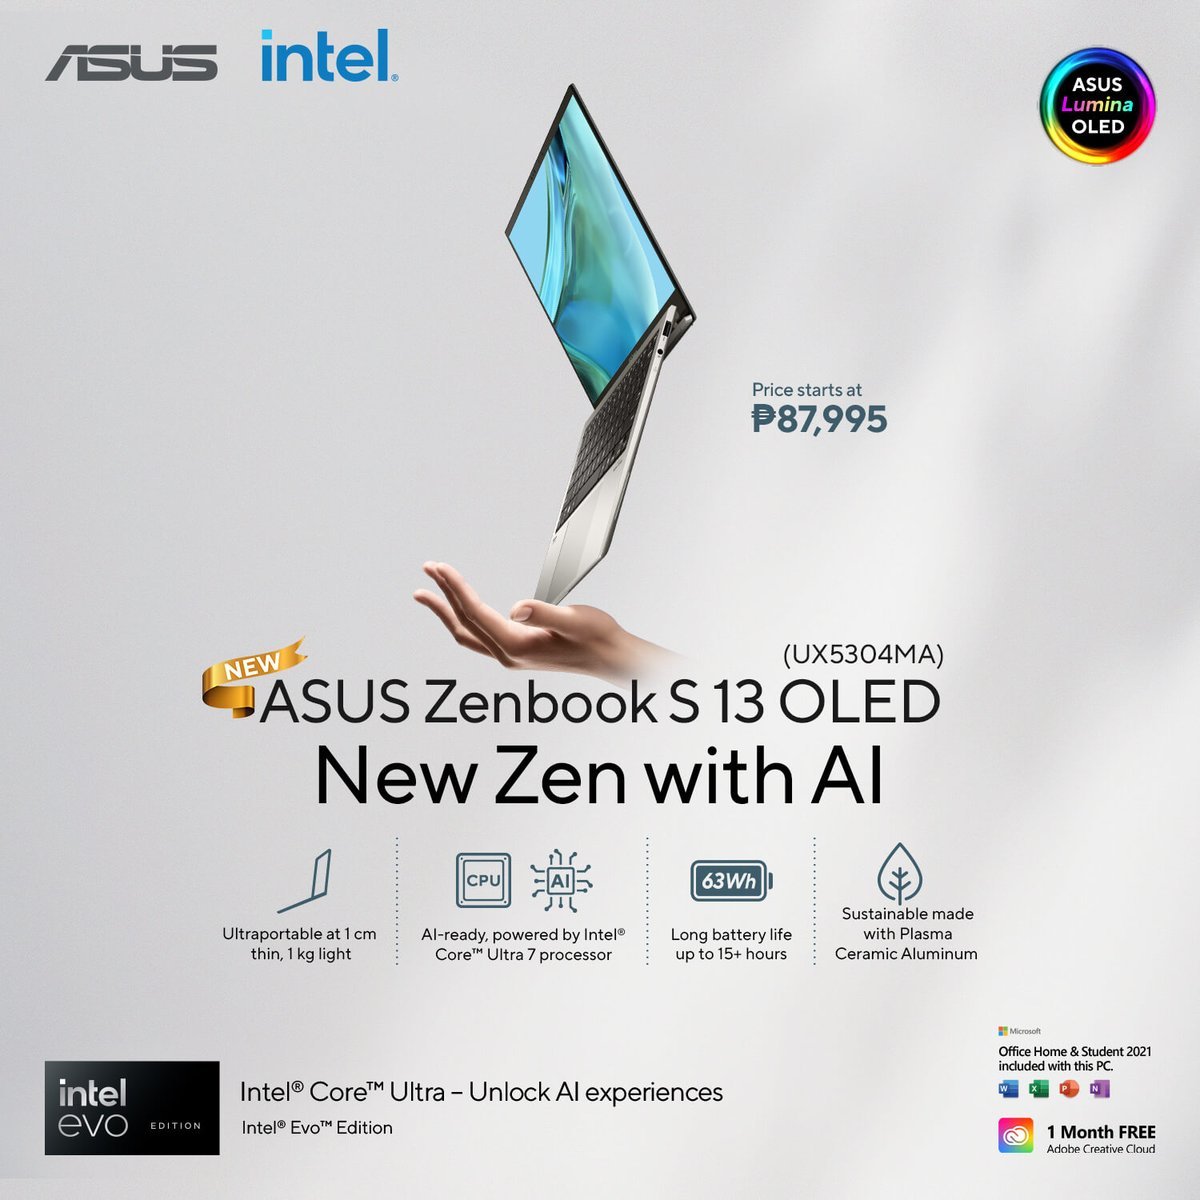 ASUS Philippines announces new Zenbook S 13 OLED with Intel Core Ultra 7